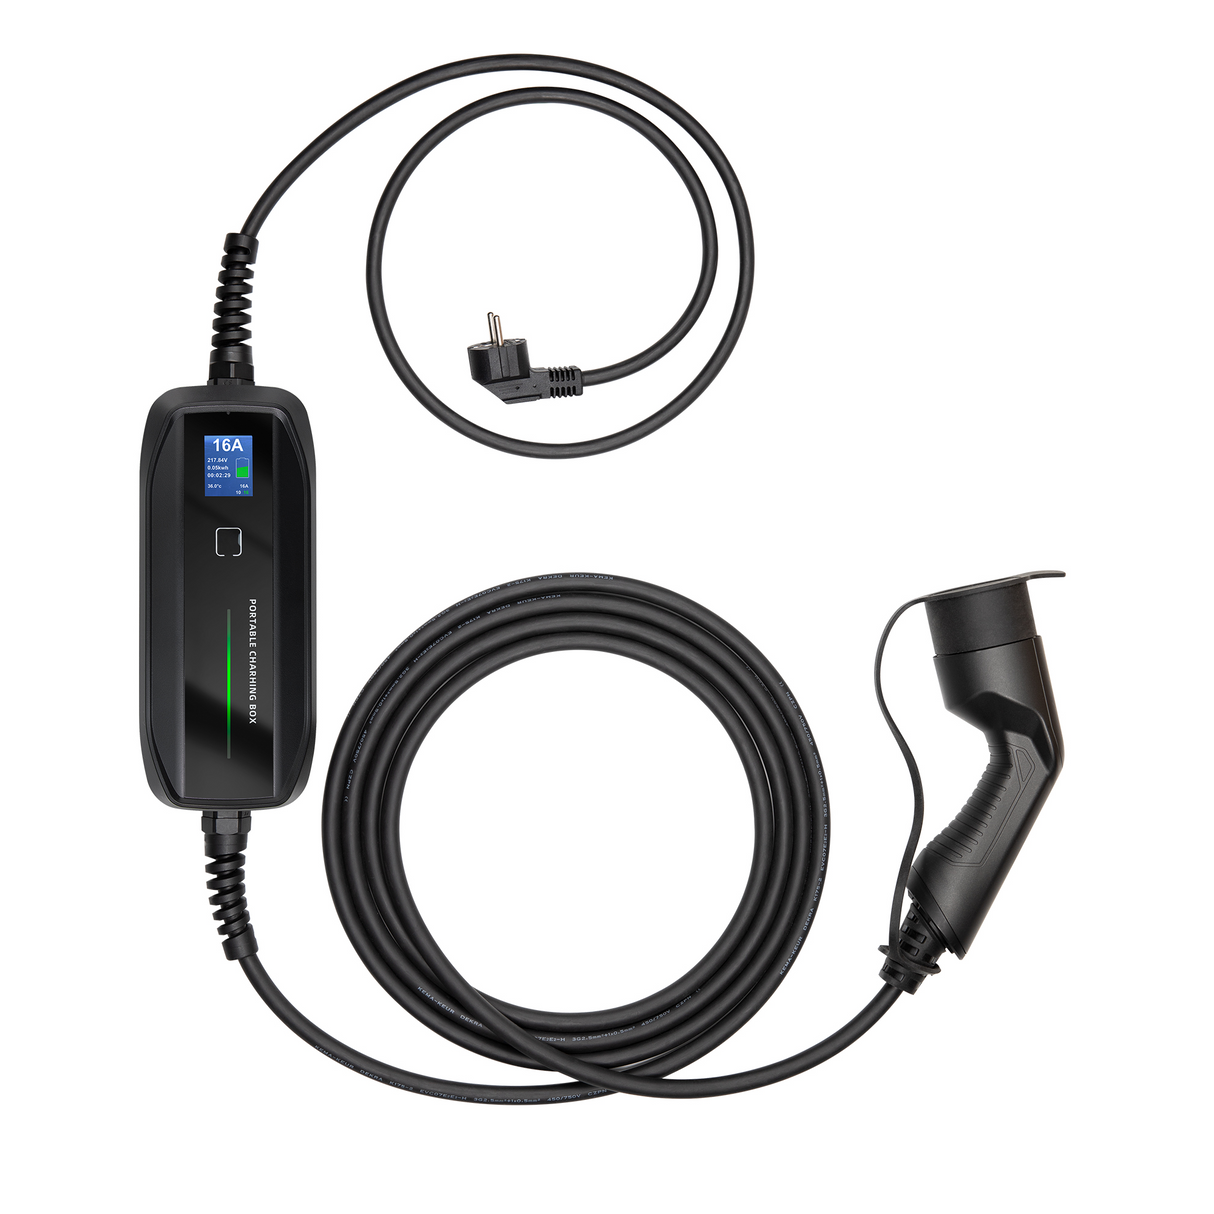 Mobile Charger Kia XCeed - LCD Black Type 2 to Schuko